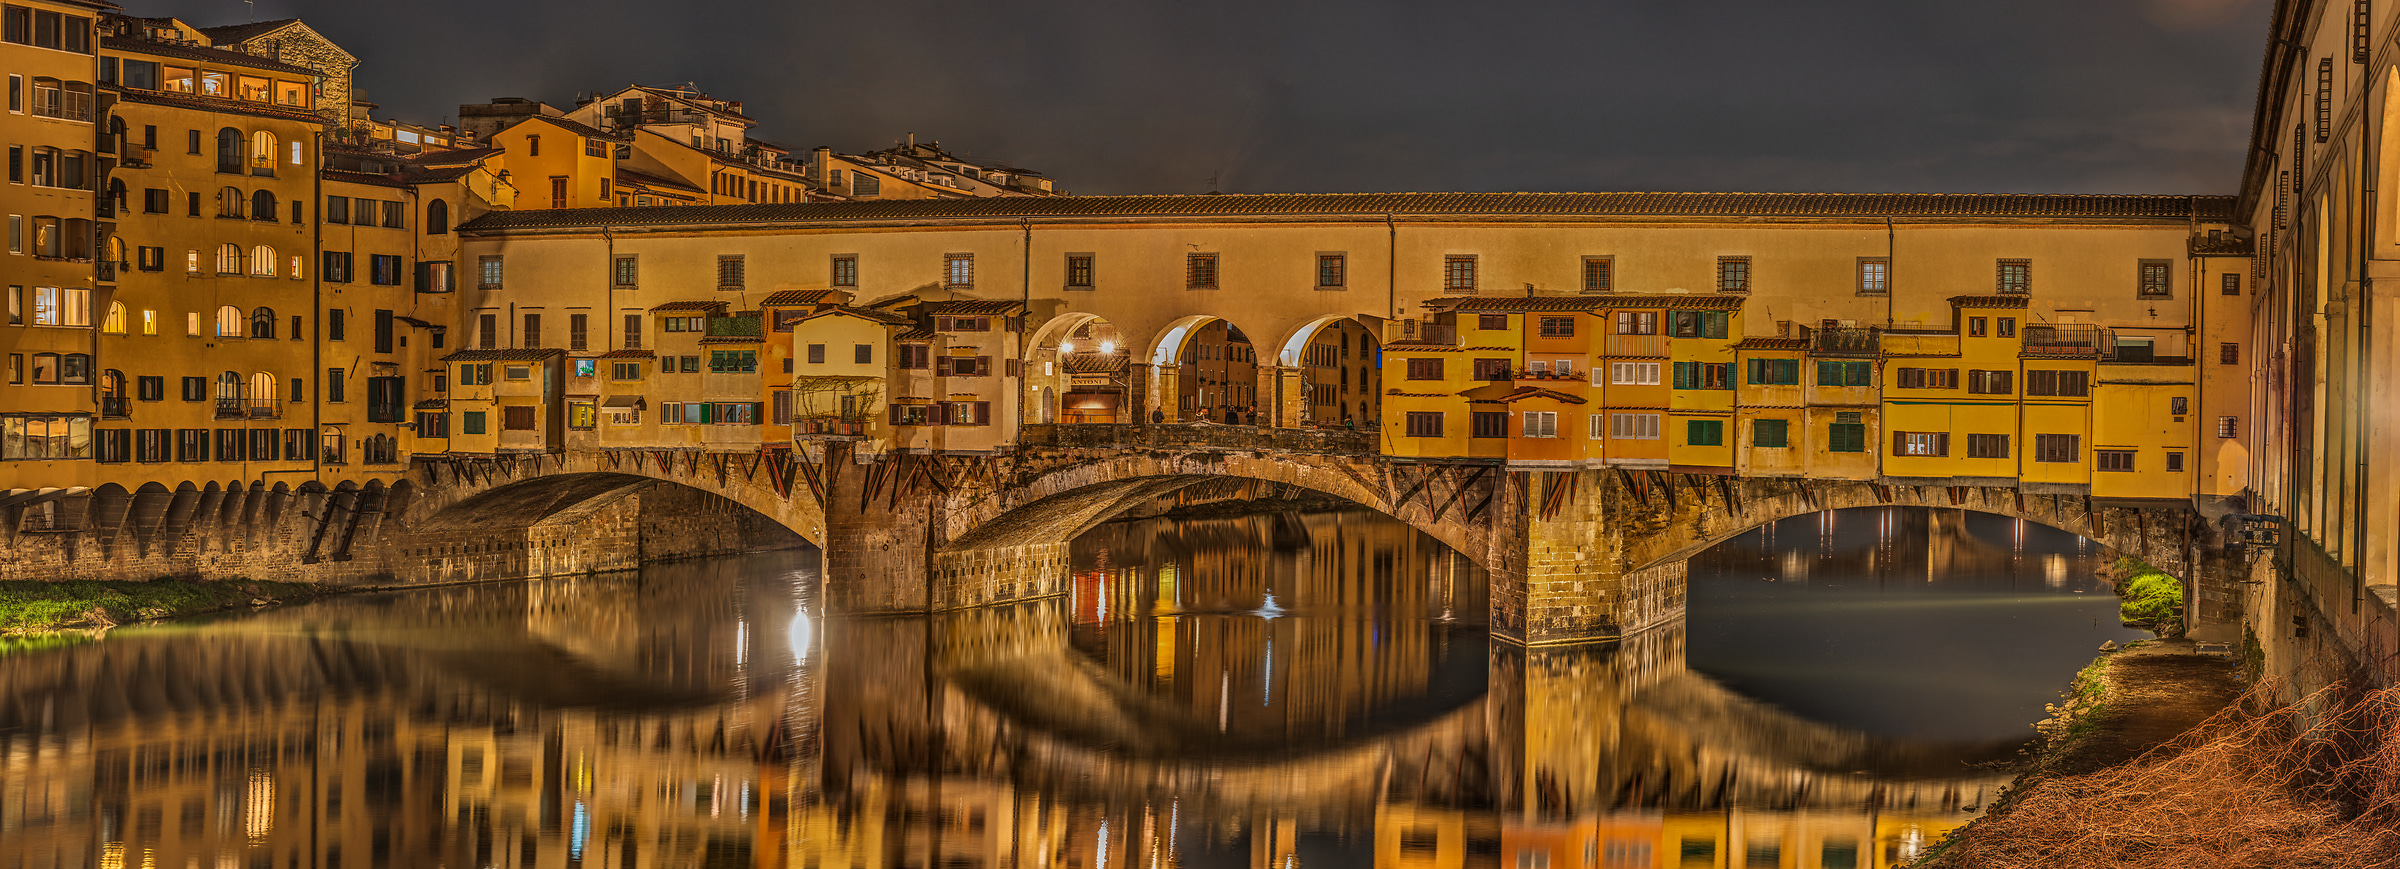 502 megapixels! A very high resolution, large-format VAST photo print of the Ponte Vecchio at night; photograph created by Alfred Feil in Ponte Vecchio, Florence, Italy